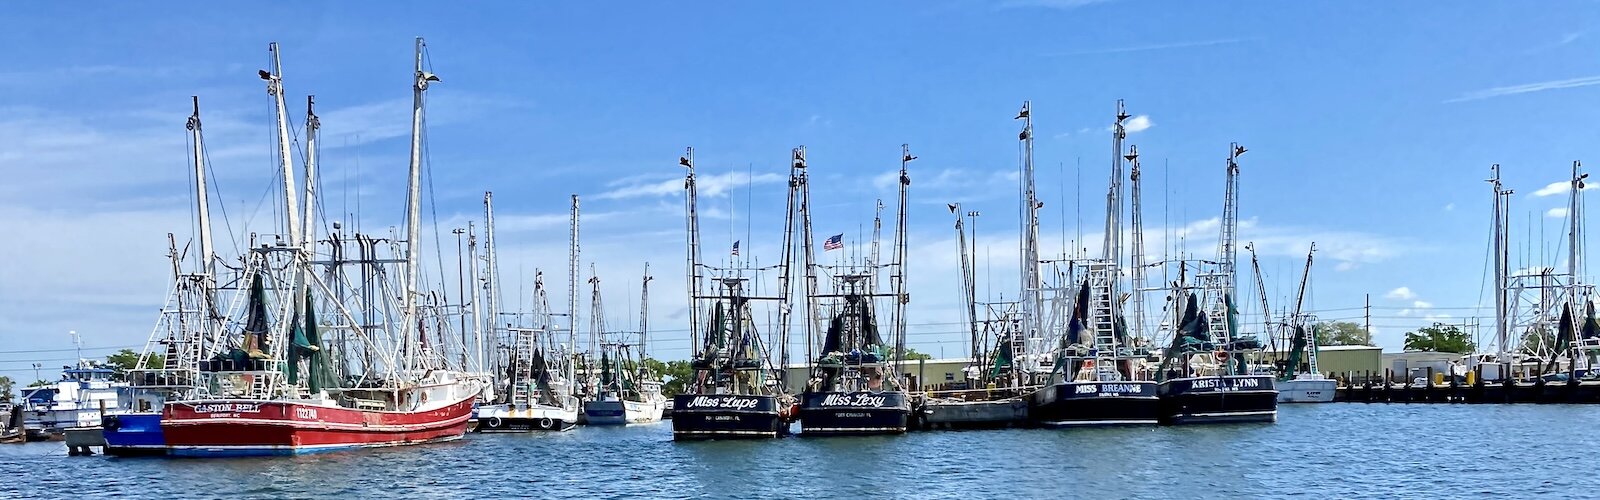 Smaller shrimp and fishing boats along with larger vessels call Port Tampa Bay home.